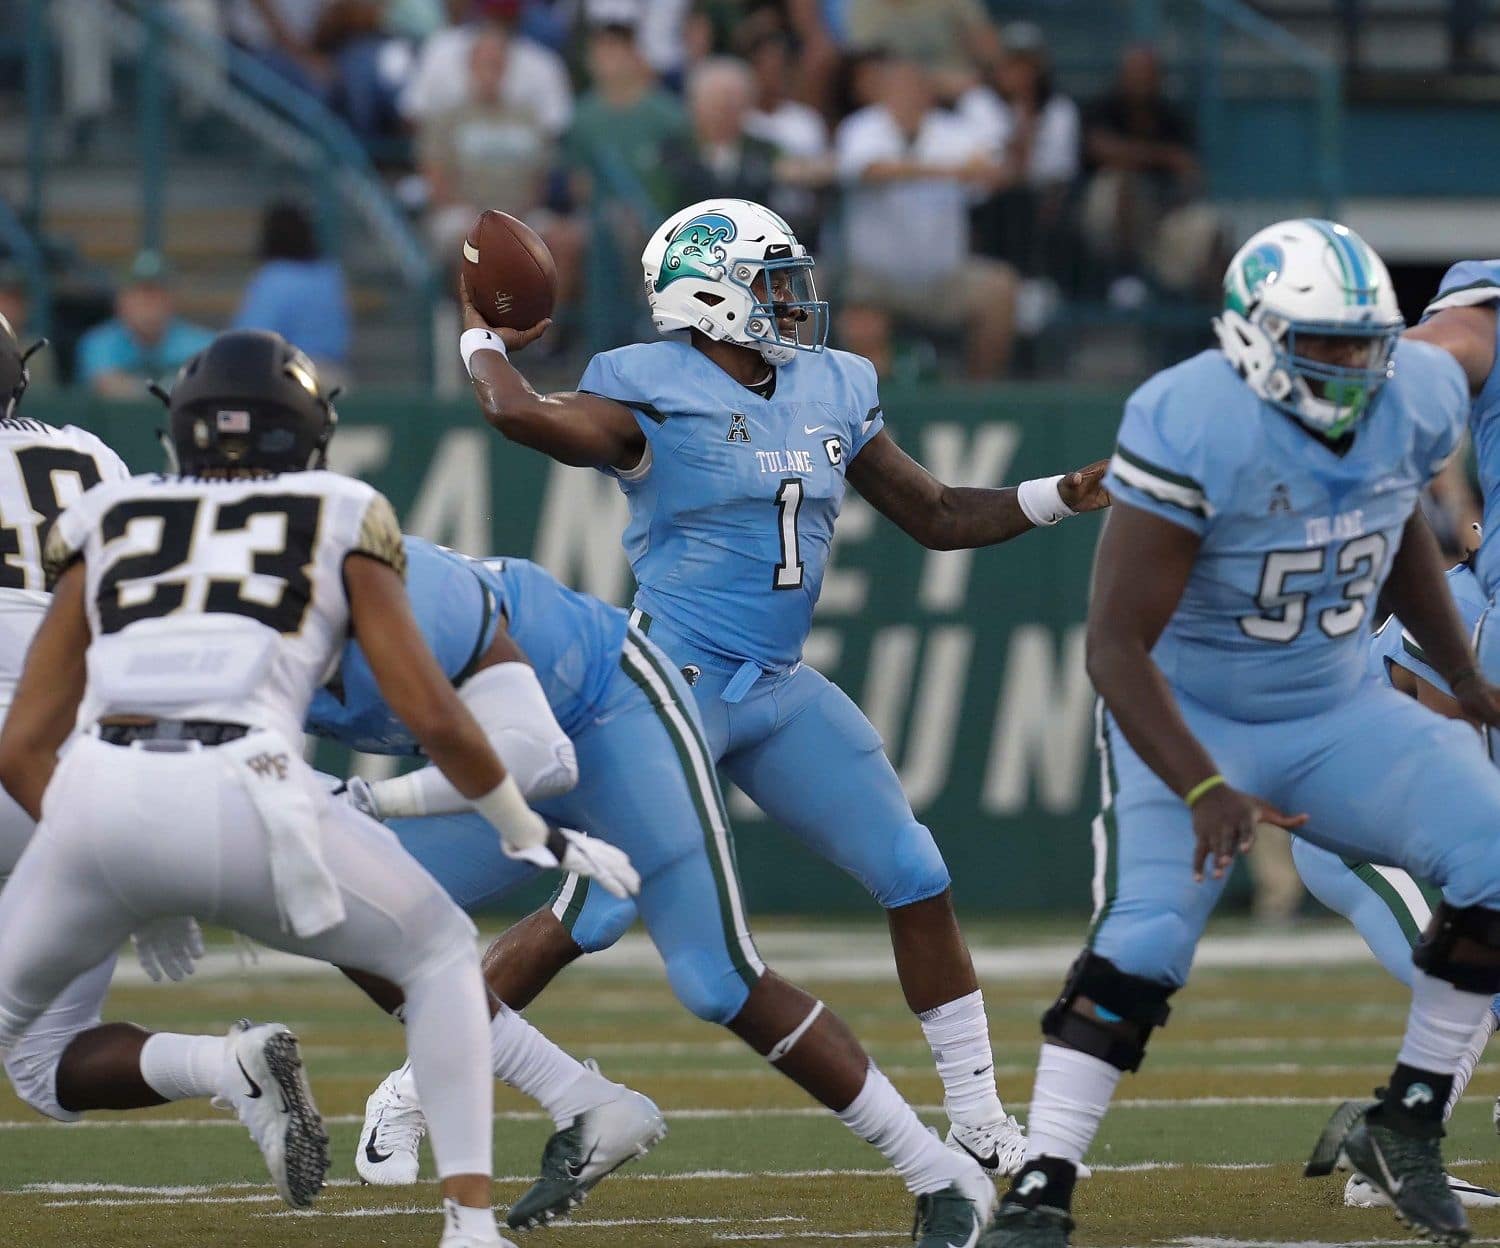 Tulane quarterback Jonathan Banks throws a pass during the first half of an NCAA college football game against Wake Forest in New Orleans on Thursday, Aug. 30, 2018. (AP Photo/Veronica Dominach)